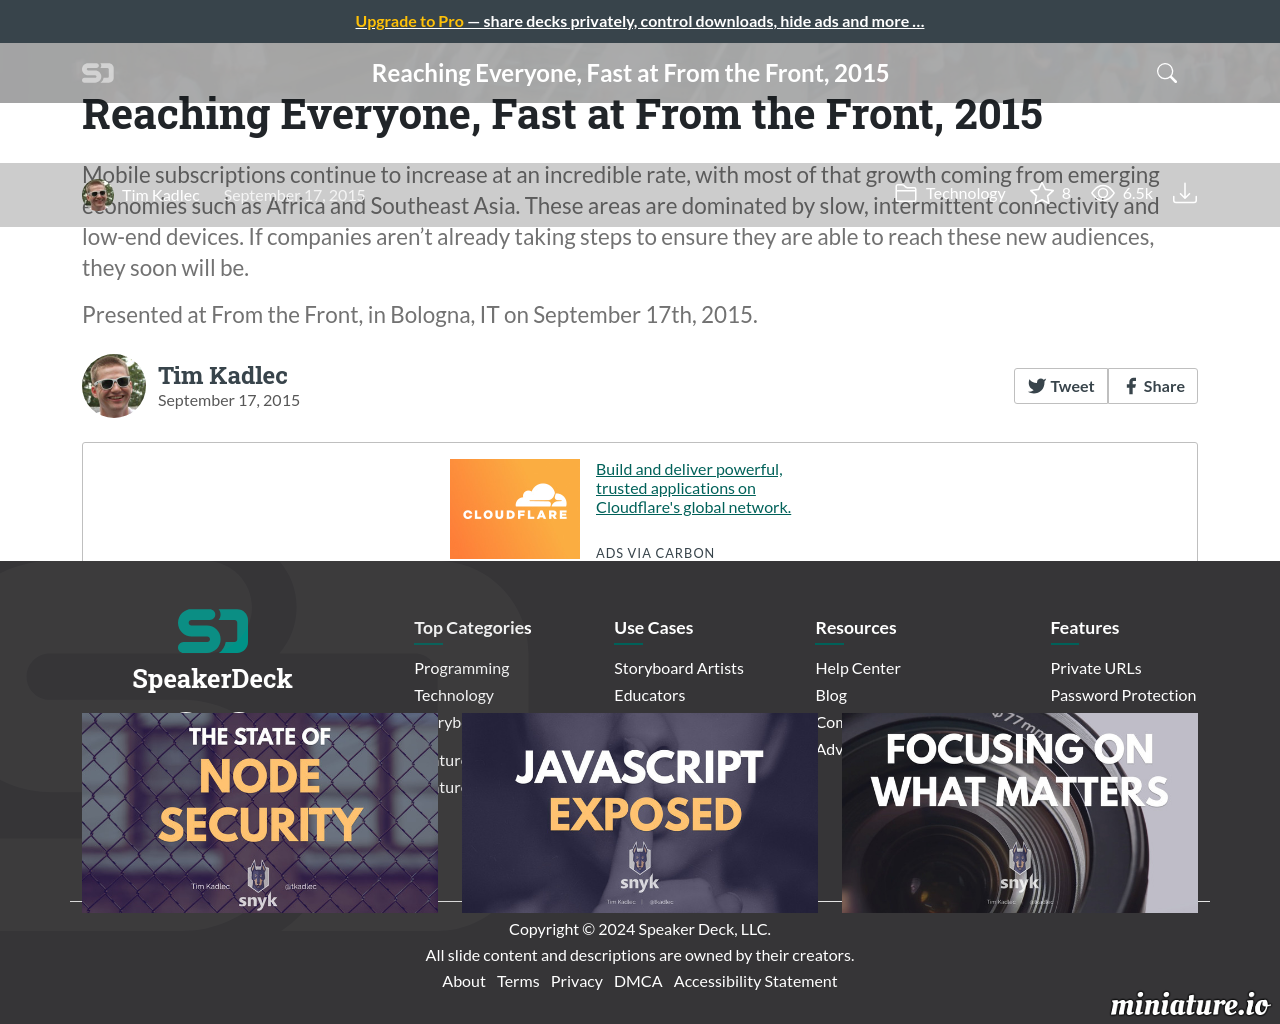 https://speakerdeck.com/tkadlec/reaching-everyone-fast-at-from-the-front-2015のプレビュー画像